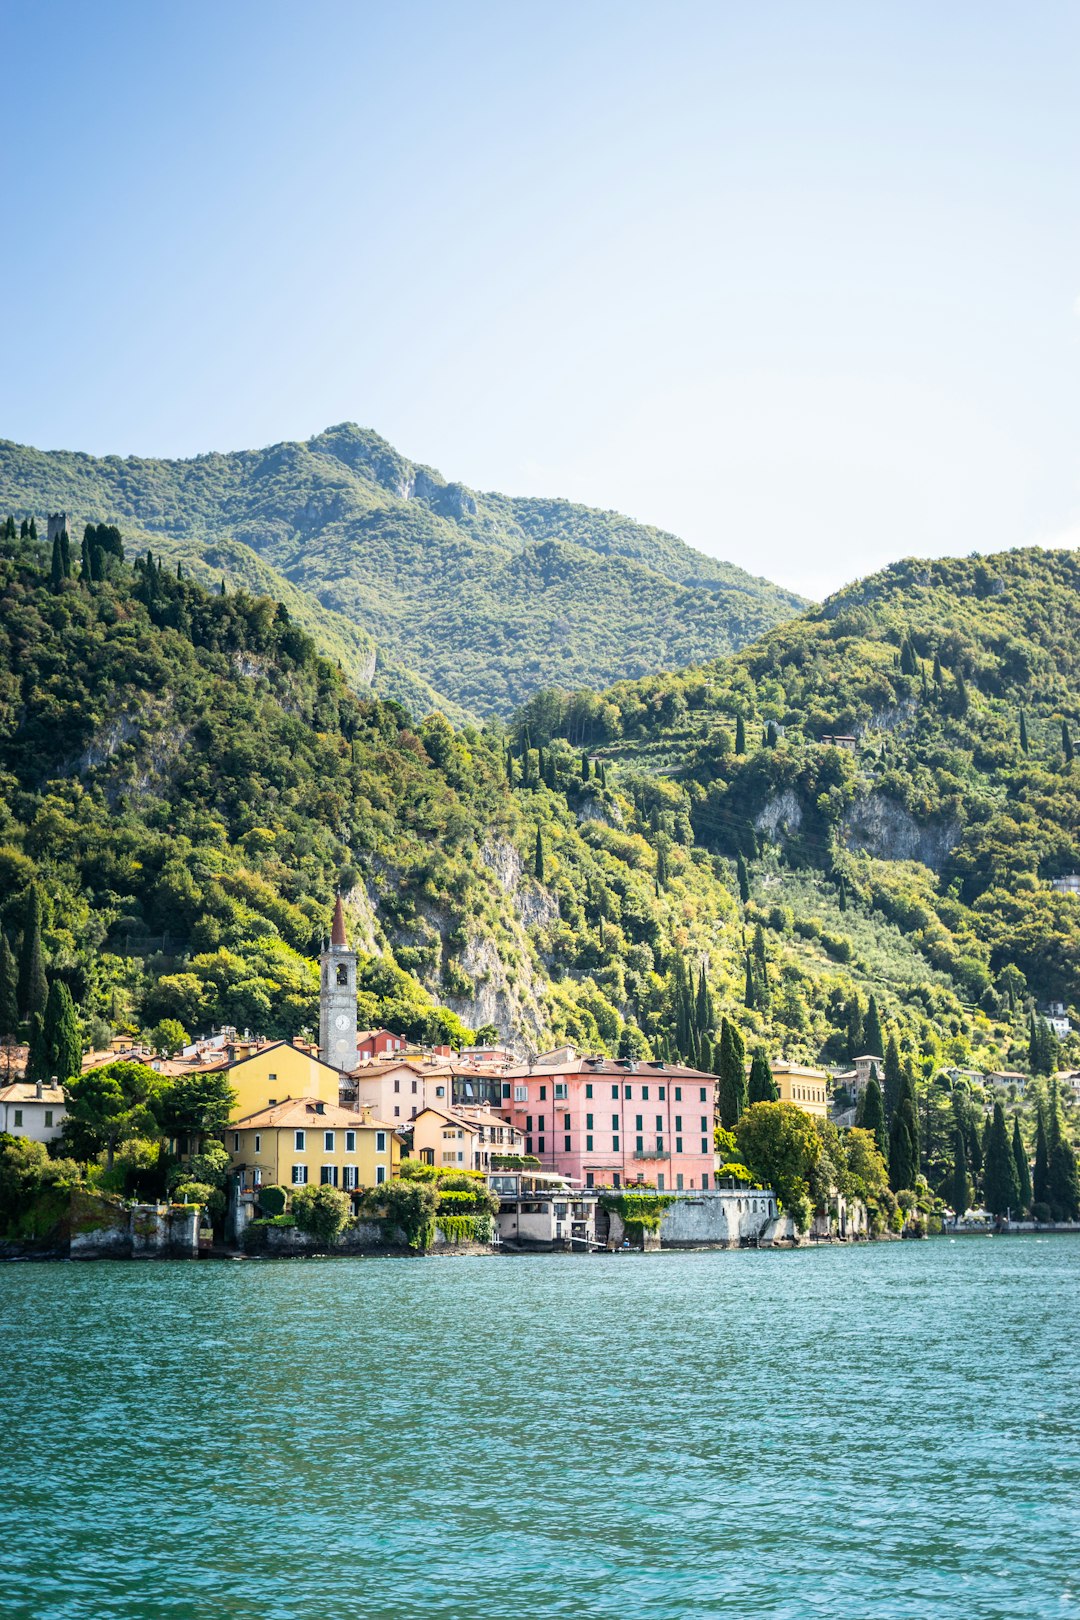 Travel Tips and Stories of Villa Monastero in Italy